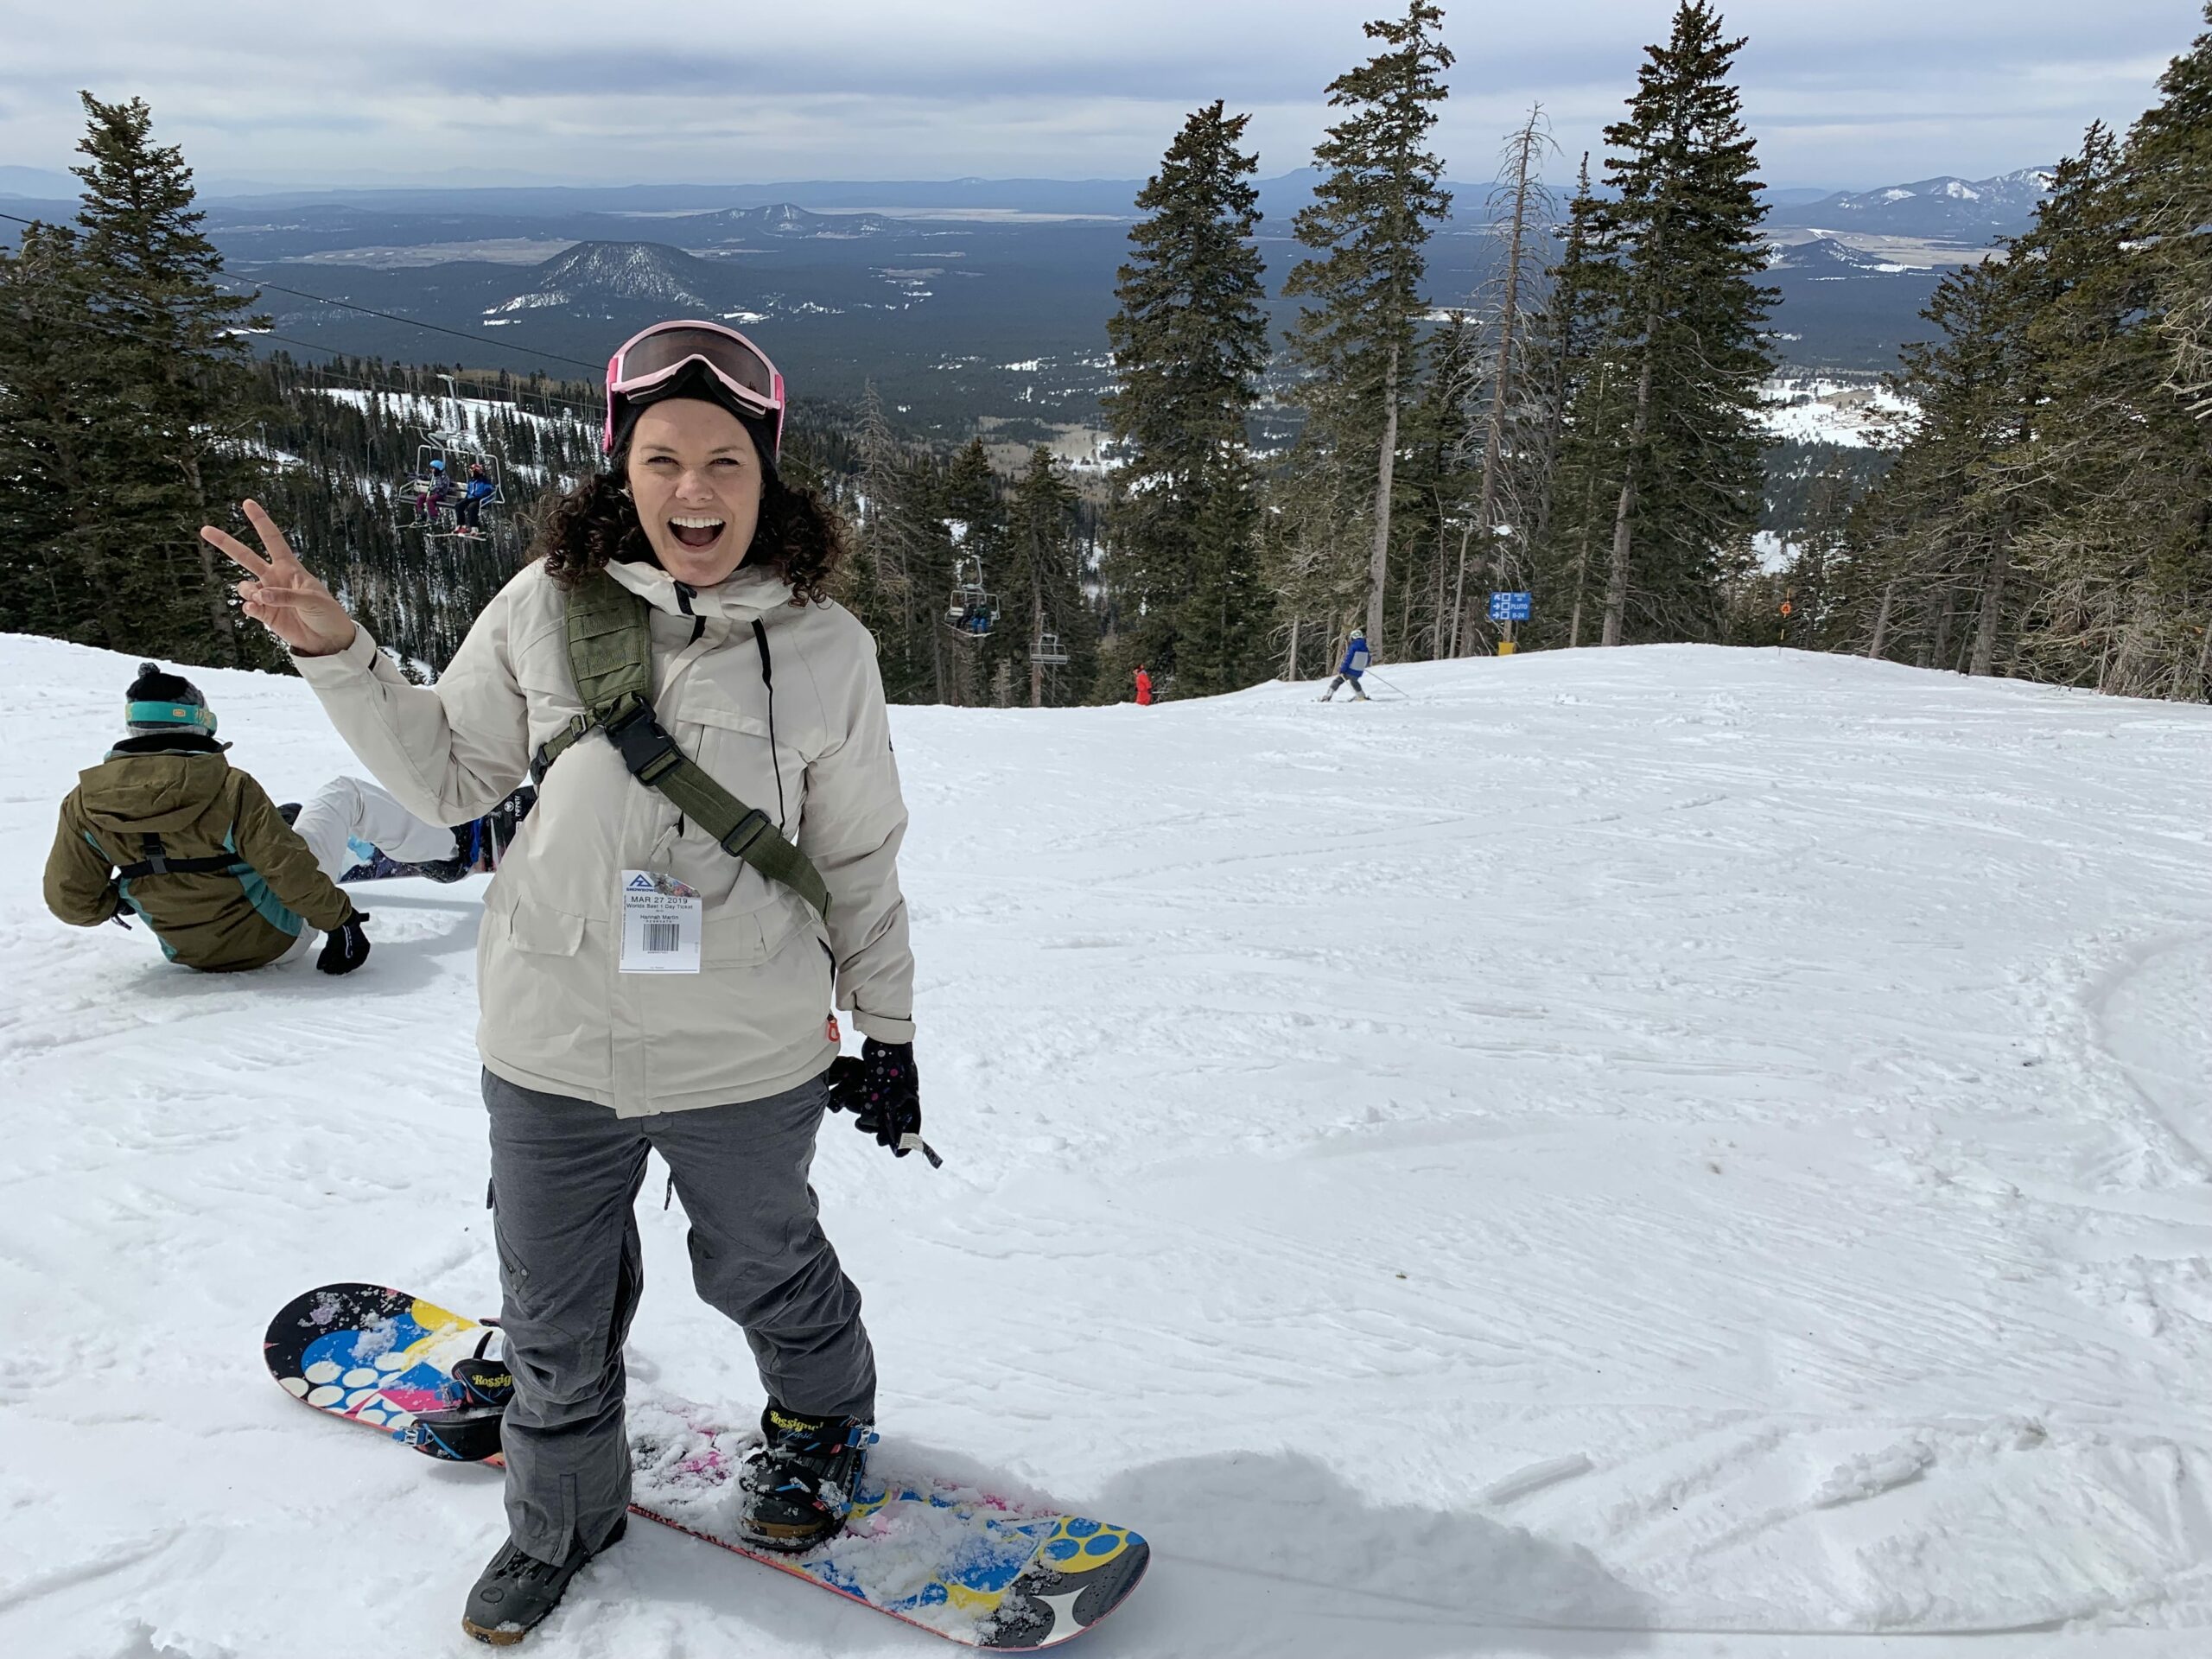 woman standing on snowboard on side of snowy mountain